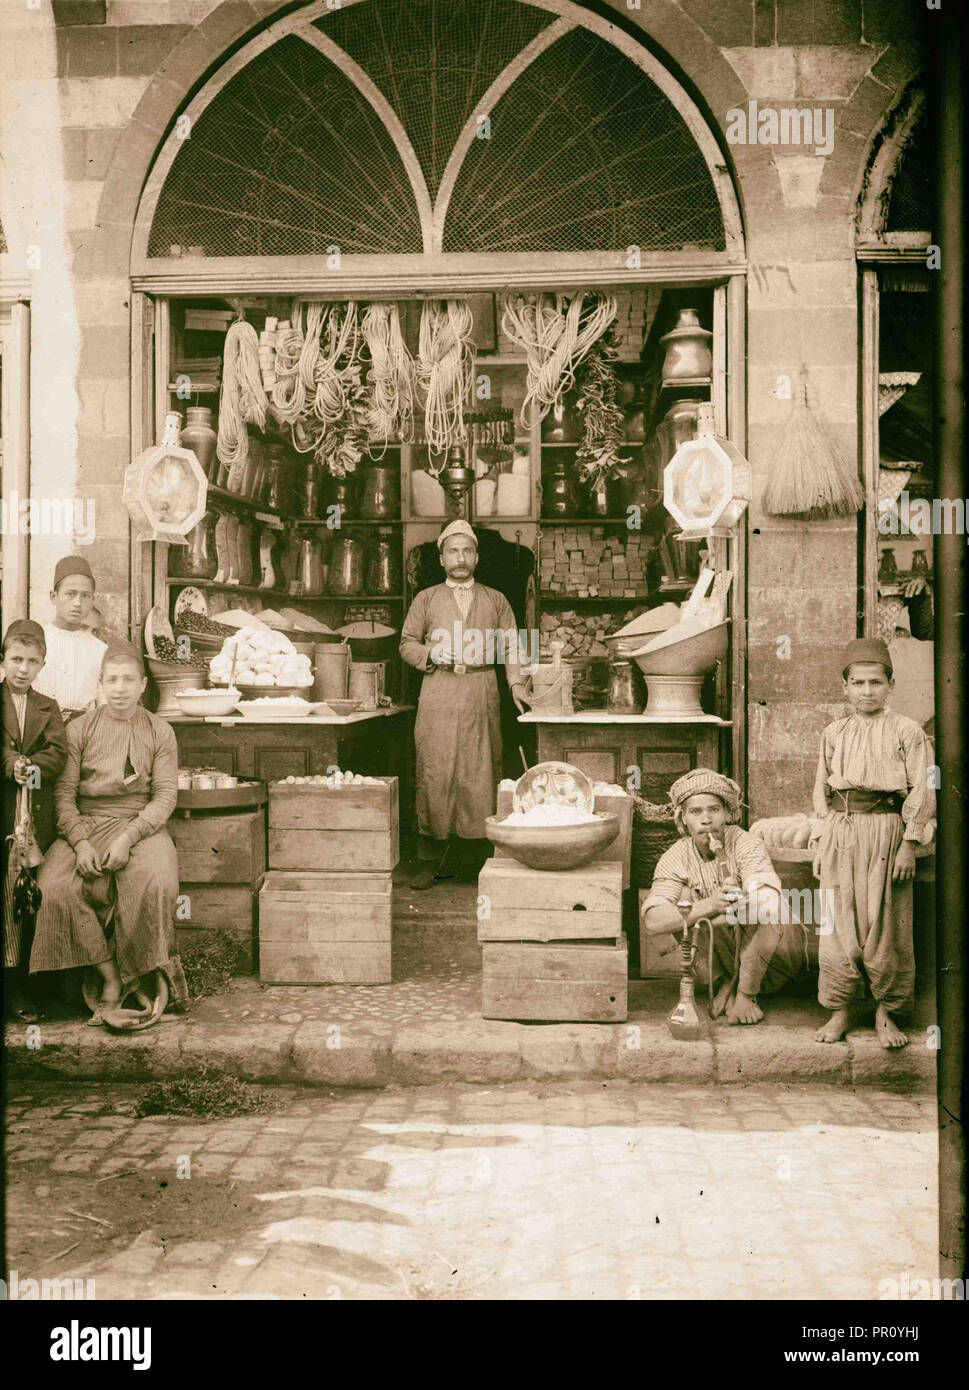 Grocer's shop 1900 Middle East Stock Photo